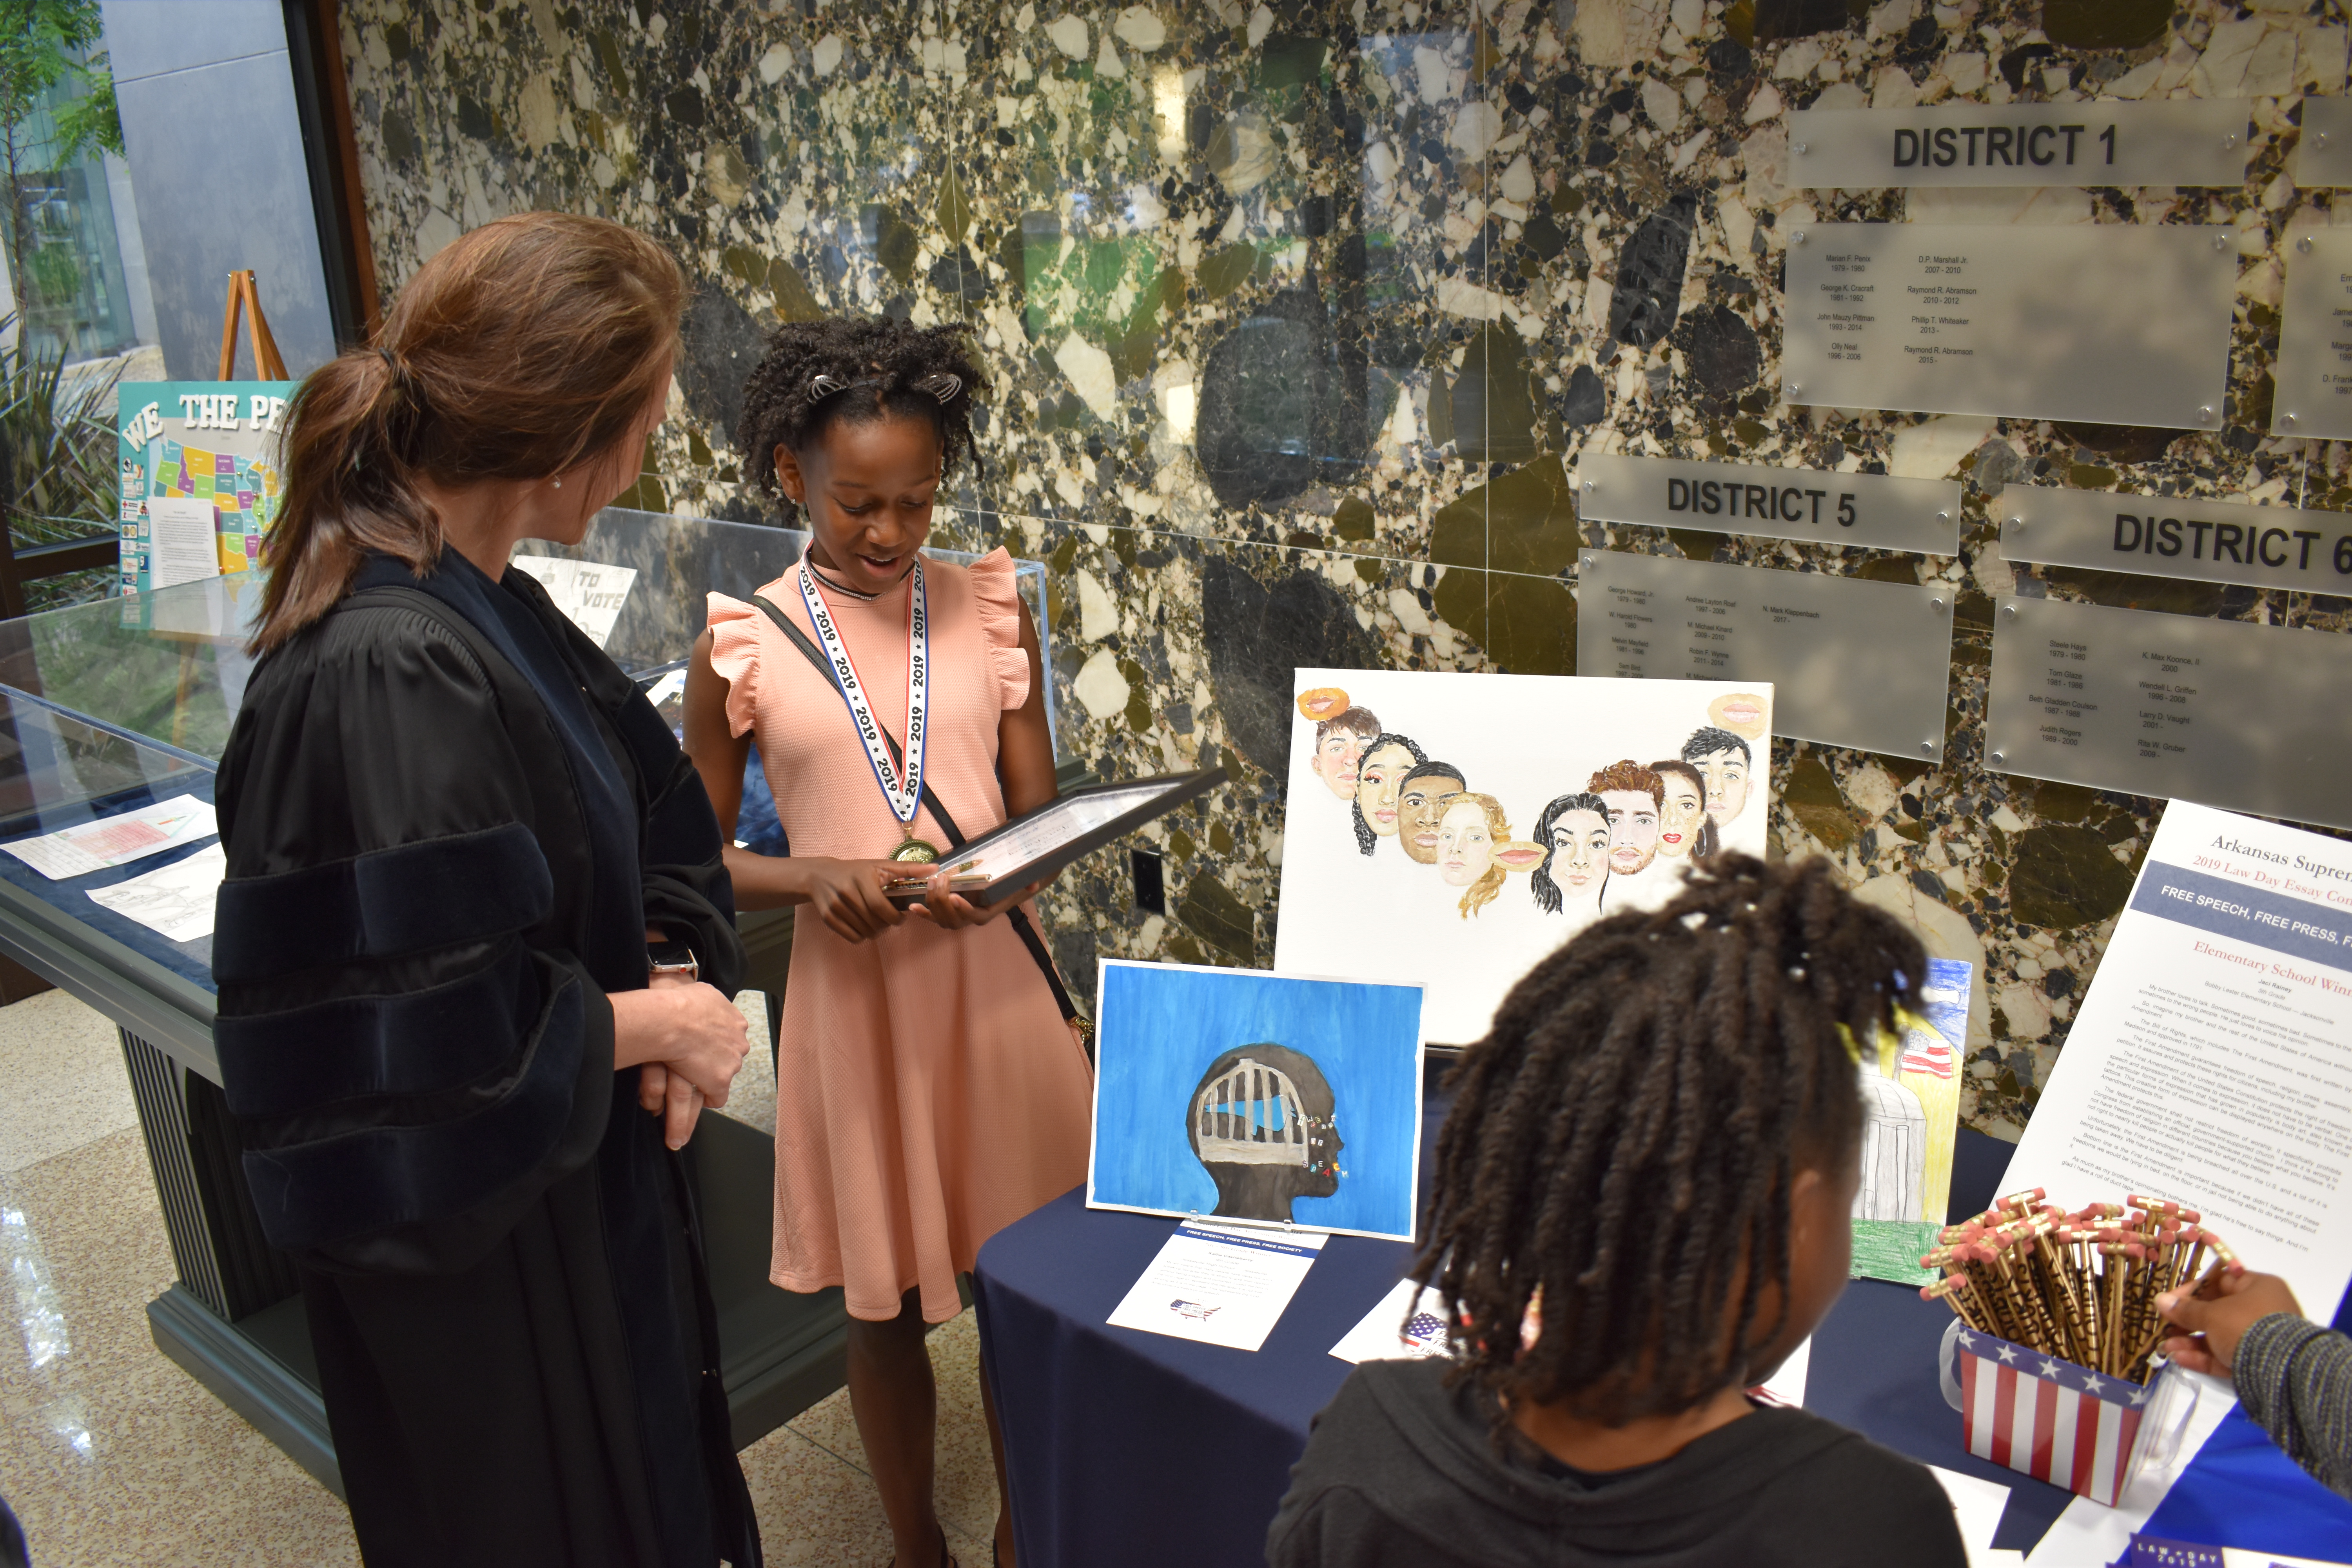 Justice Wood viewing law day art with two children during a tour